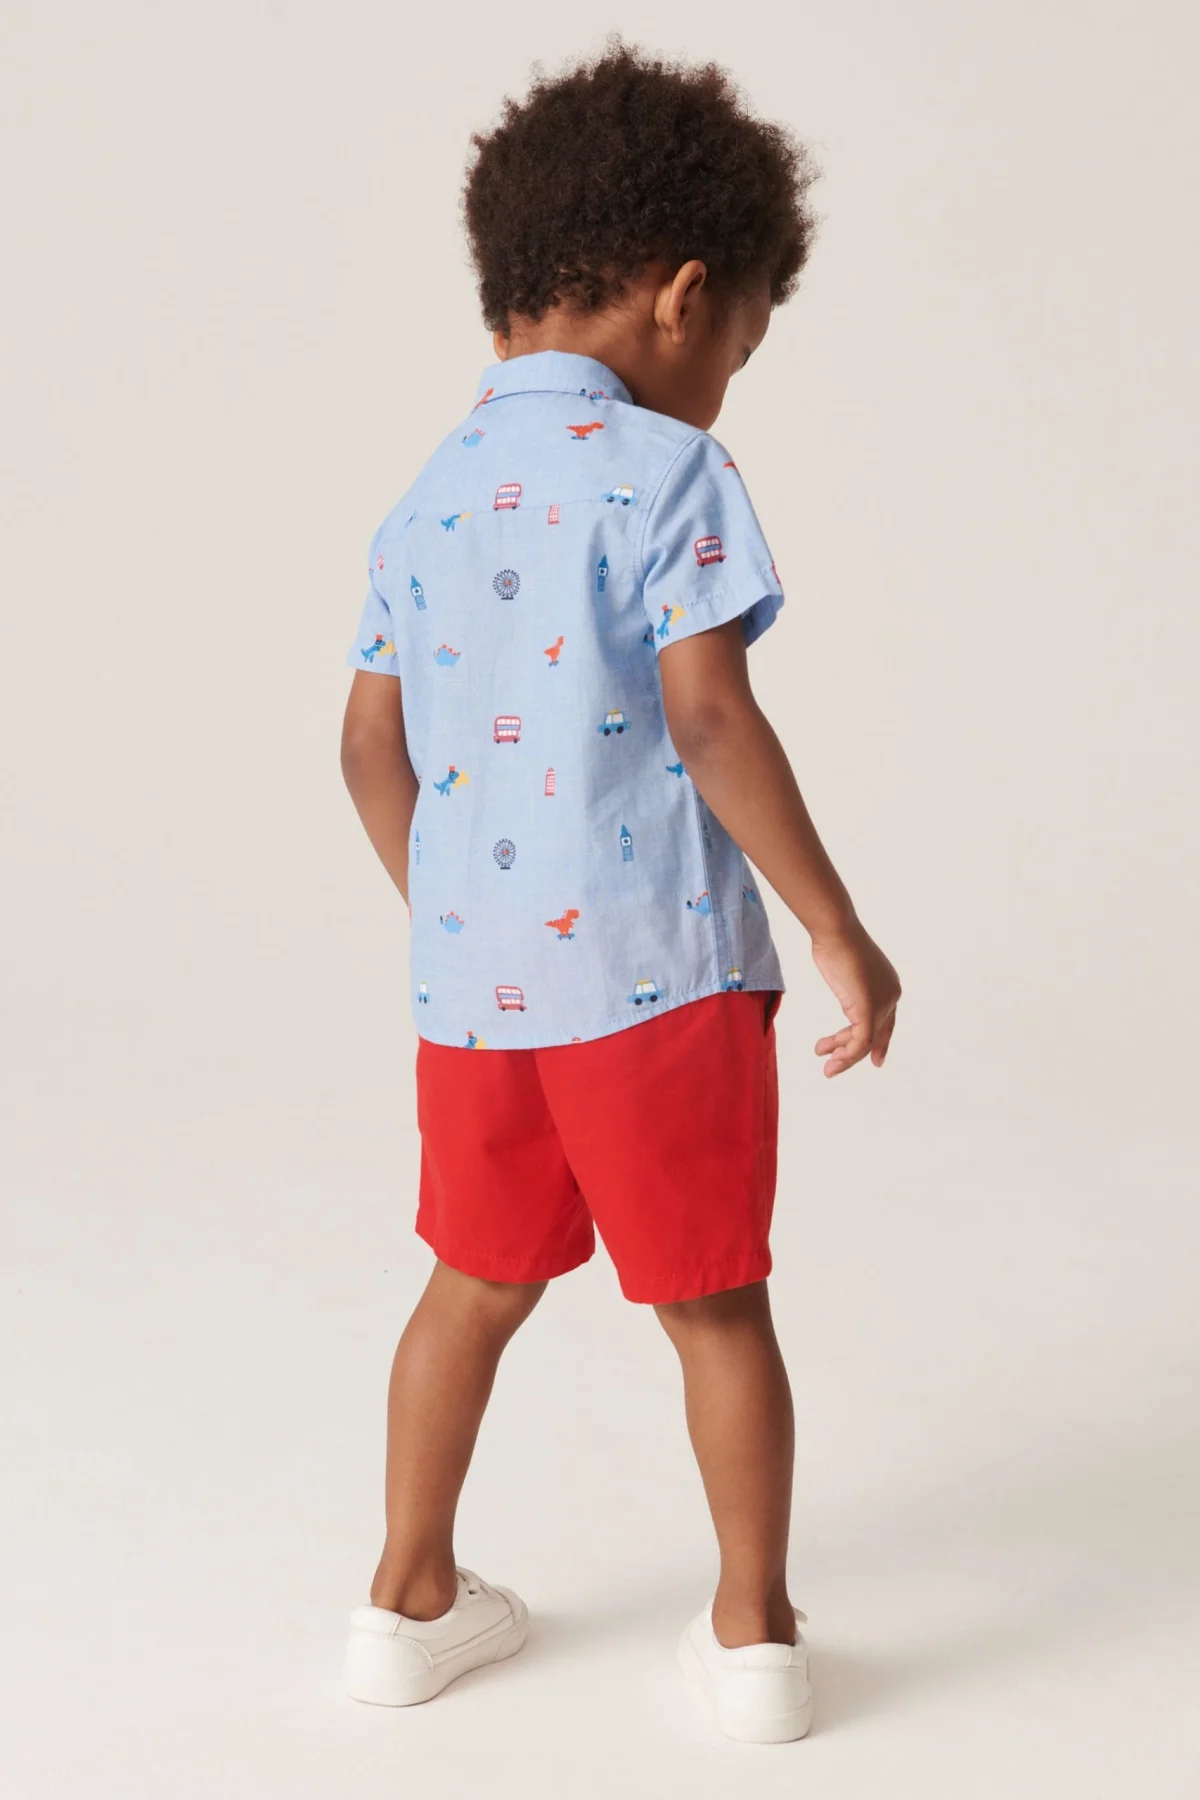 official set red shirt and shorts with dinosaur design